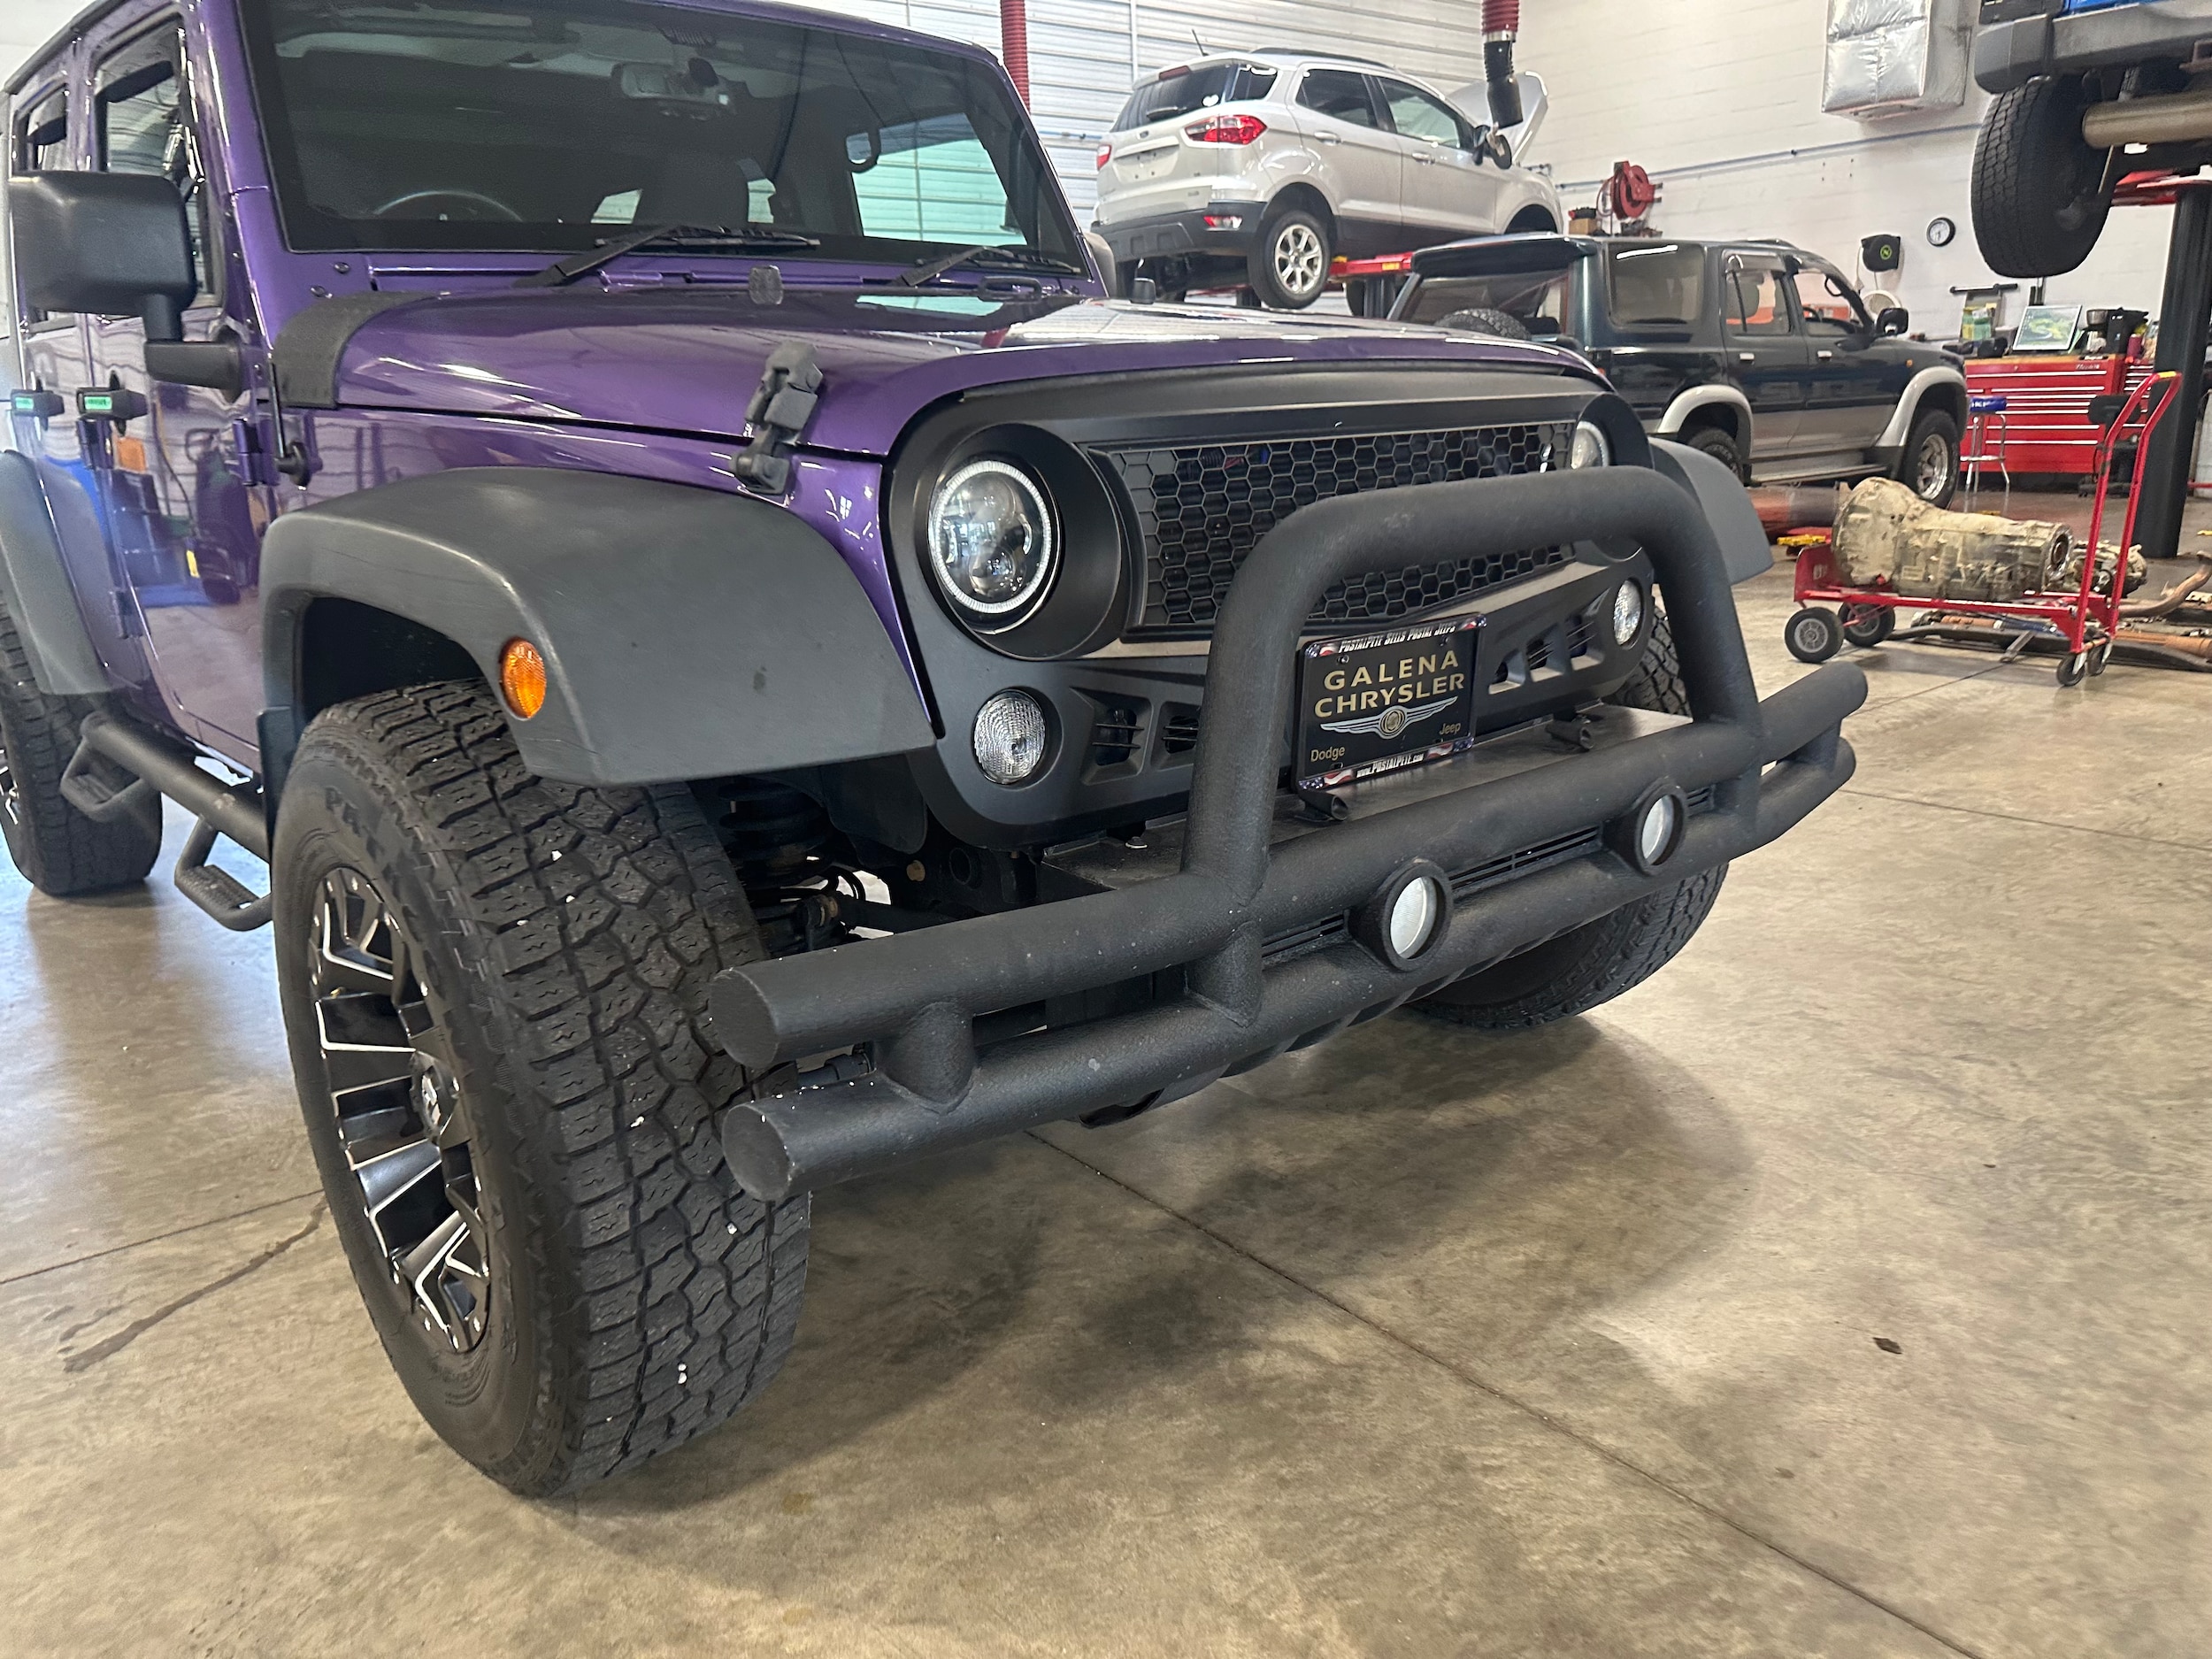 Used 2018 Jeep Wrangler JK Unlimited Sport with VIN 1C4BJWKGXJL892907 for sale in Galena, IL